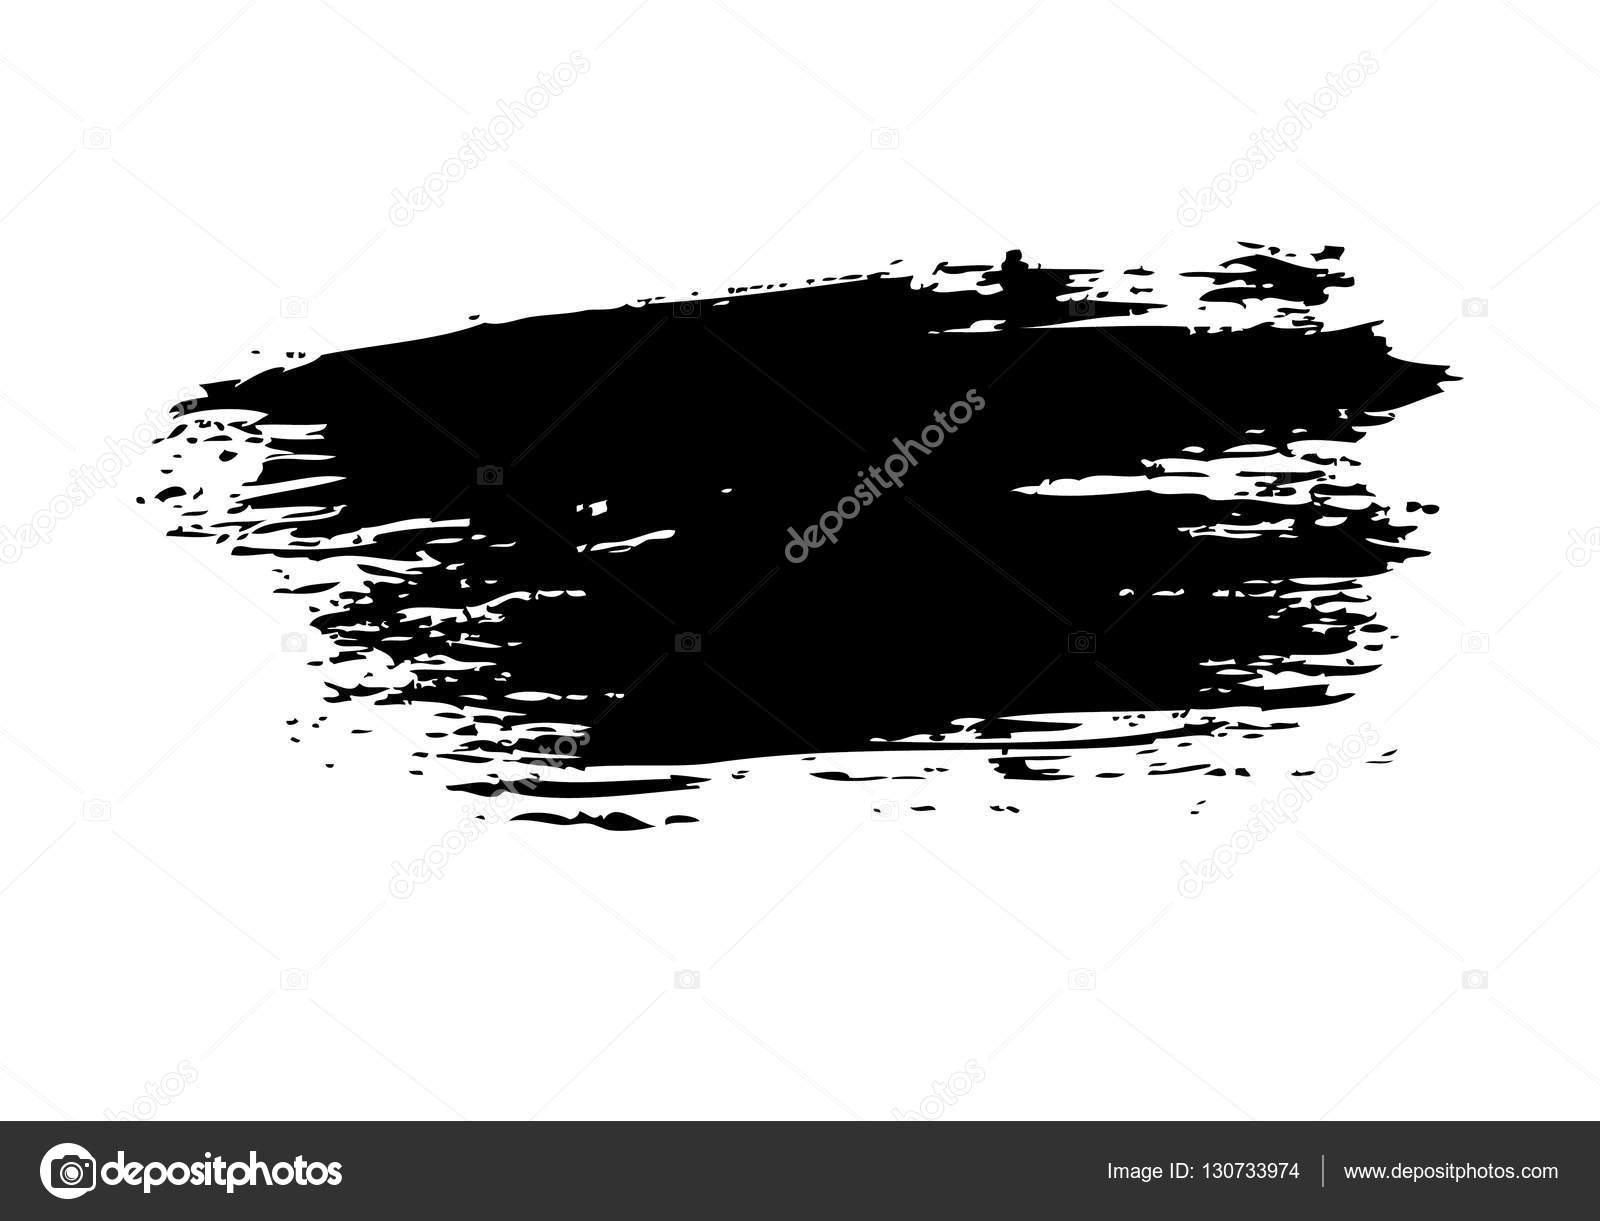 Download 100 Grunge Brush Strokes in PNG Transparent